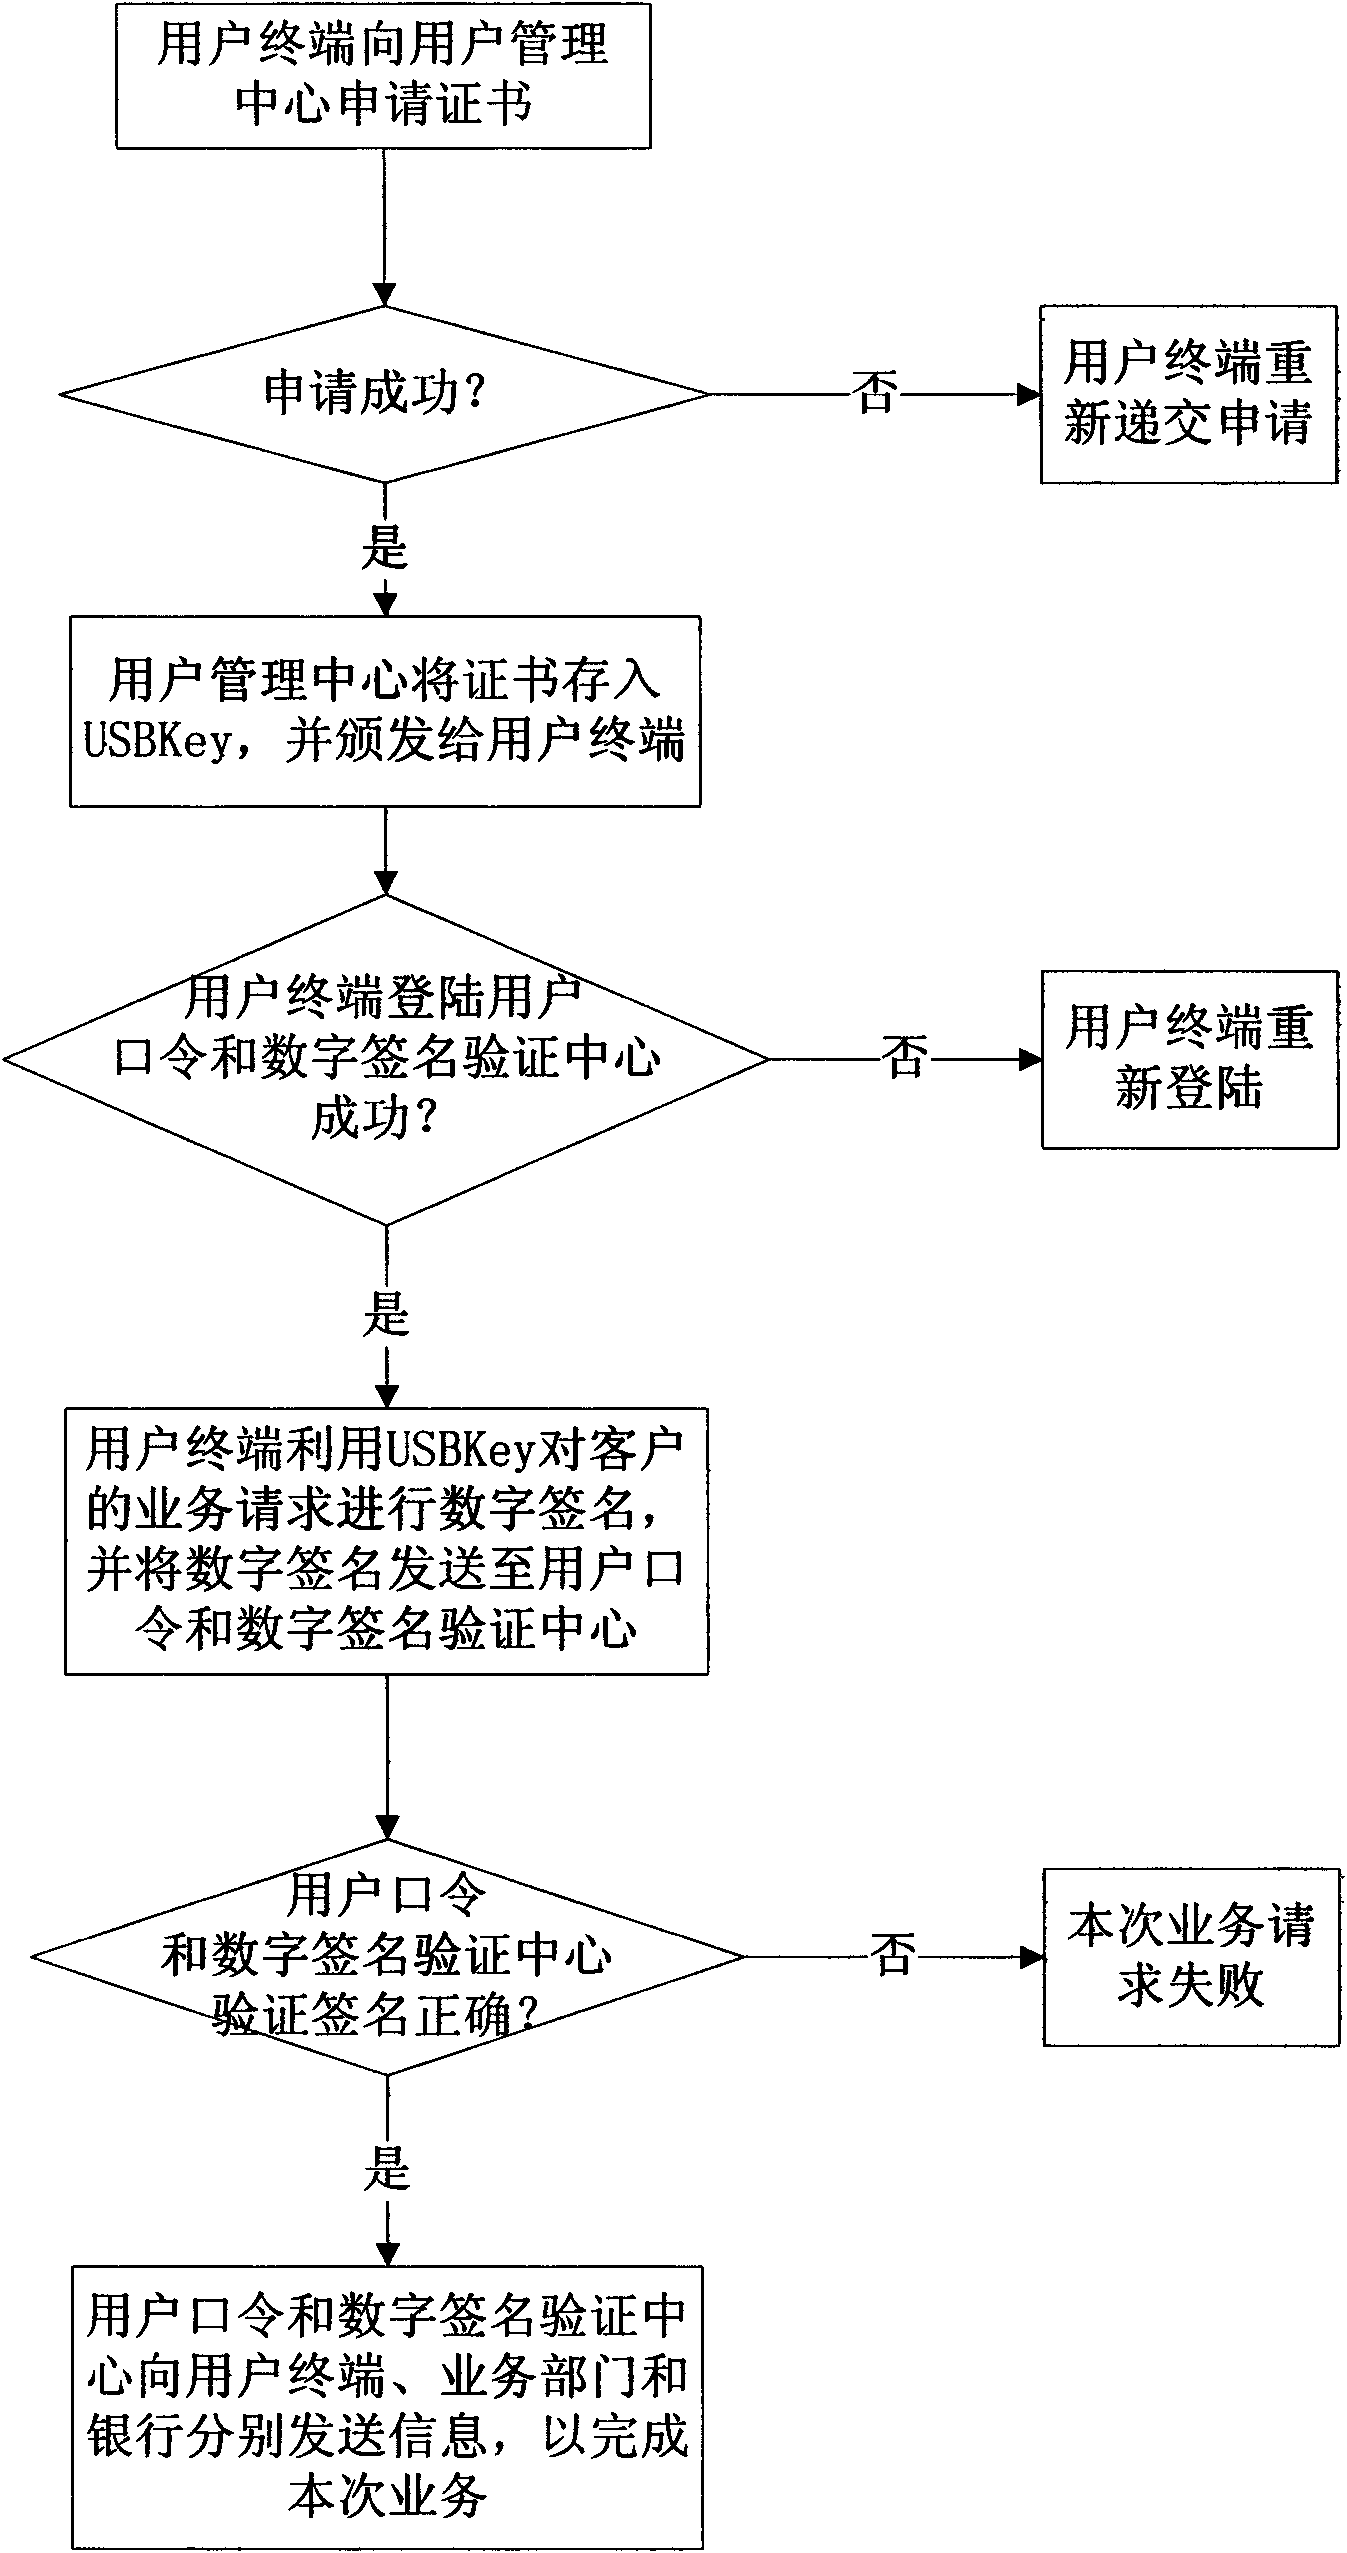 Digital signature authentication system based on third party and authentication method